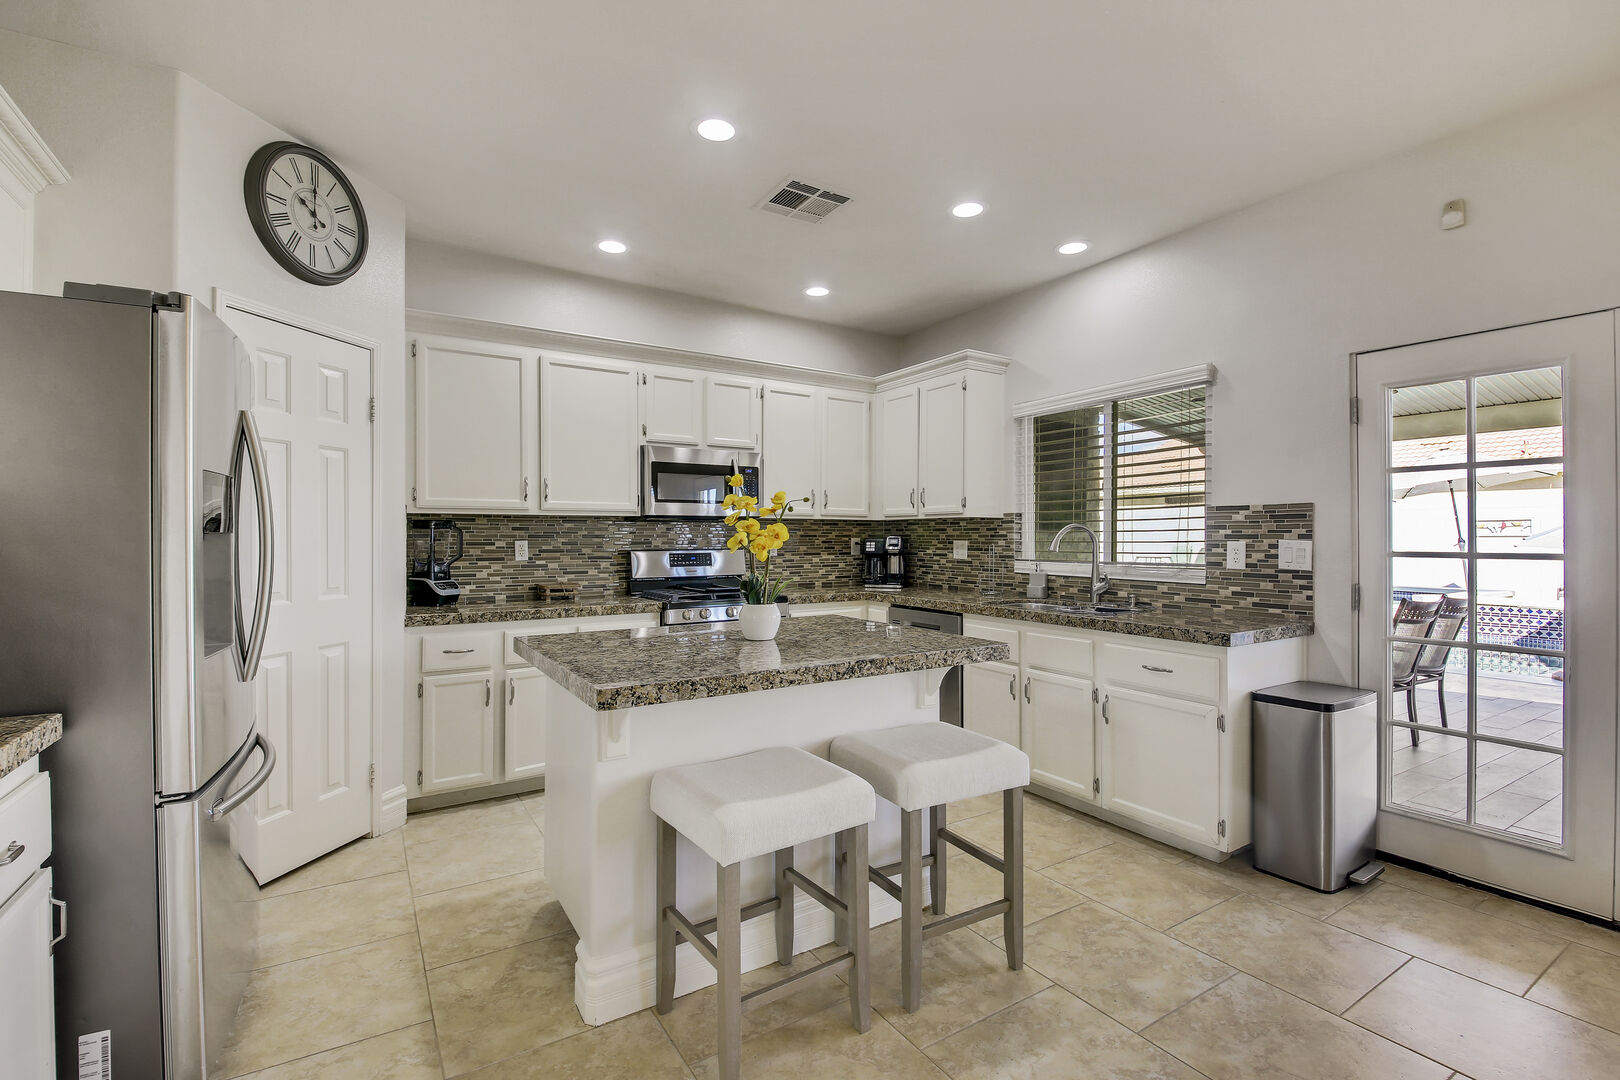 The fully-equipped kitchen boasts stunning stainless steel appliances.